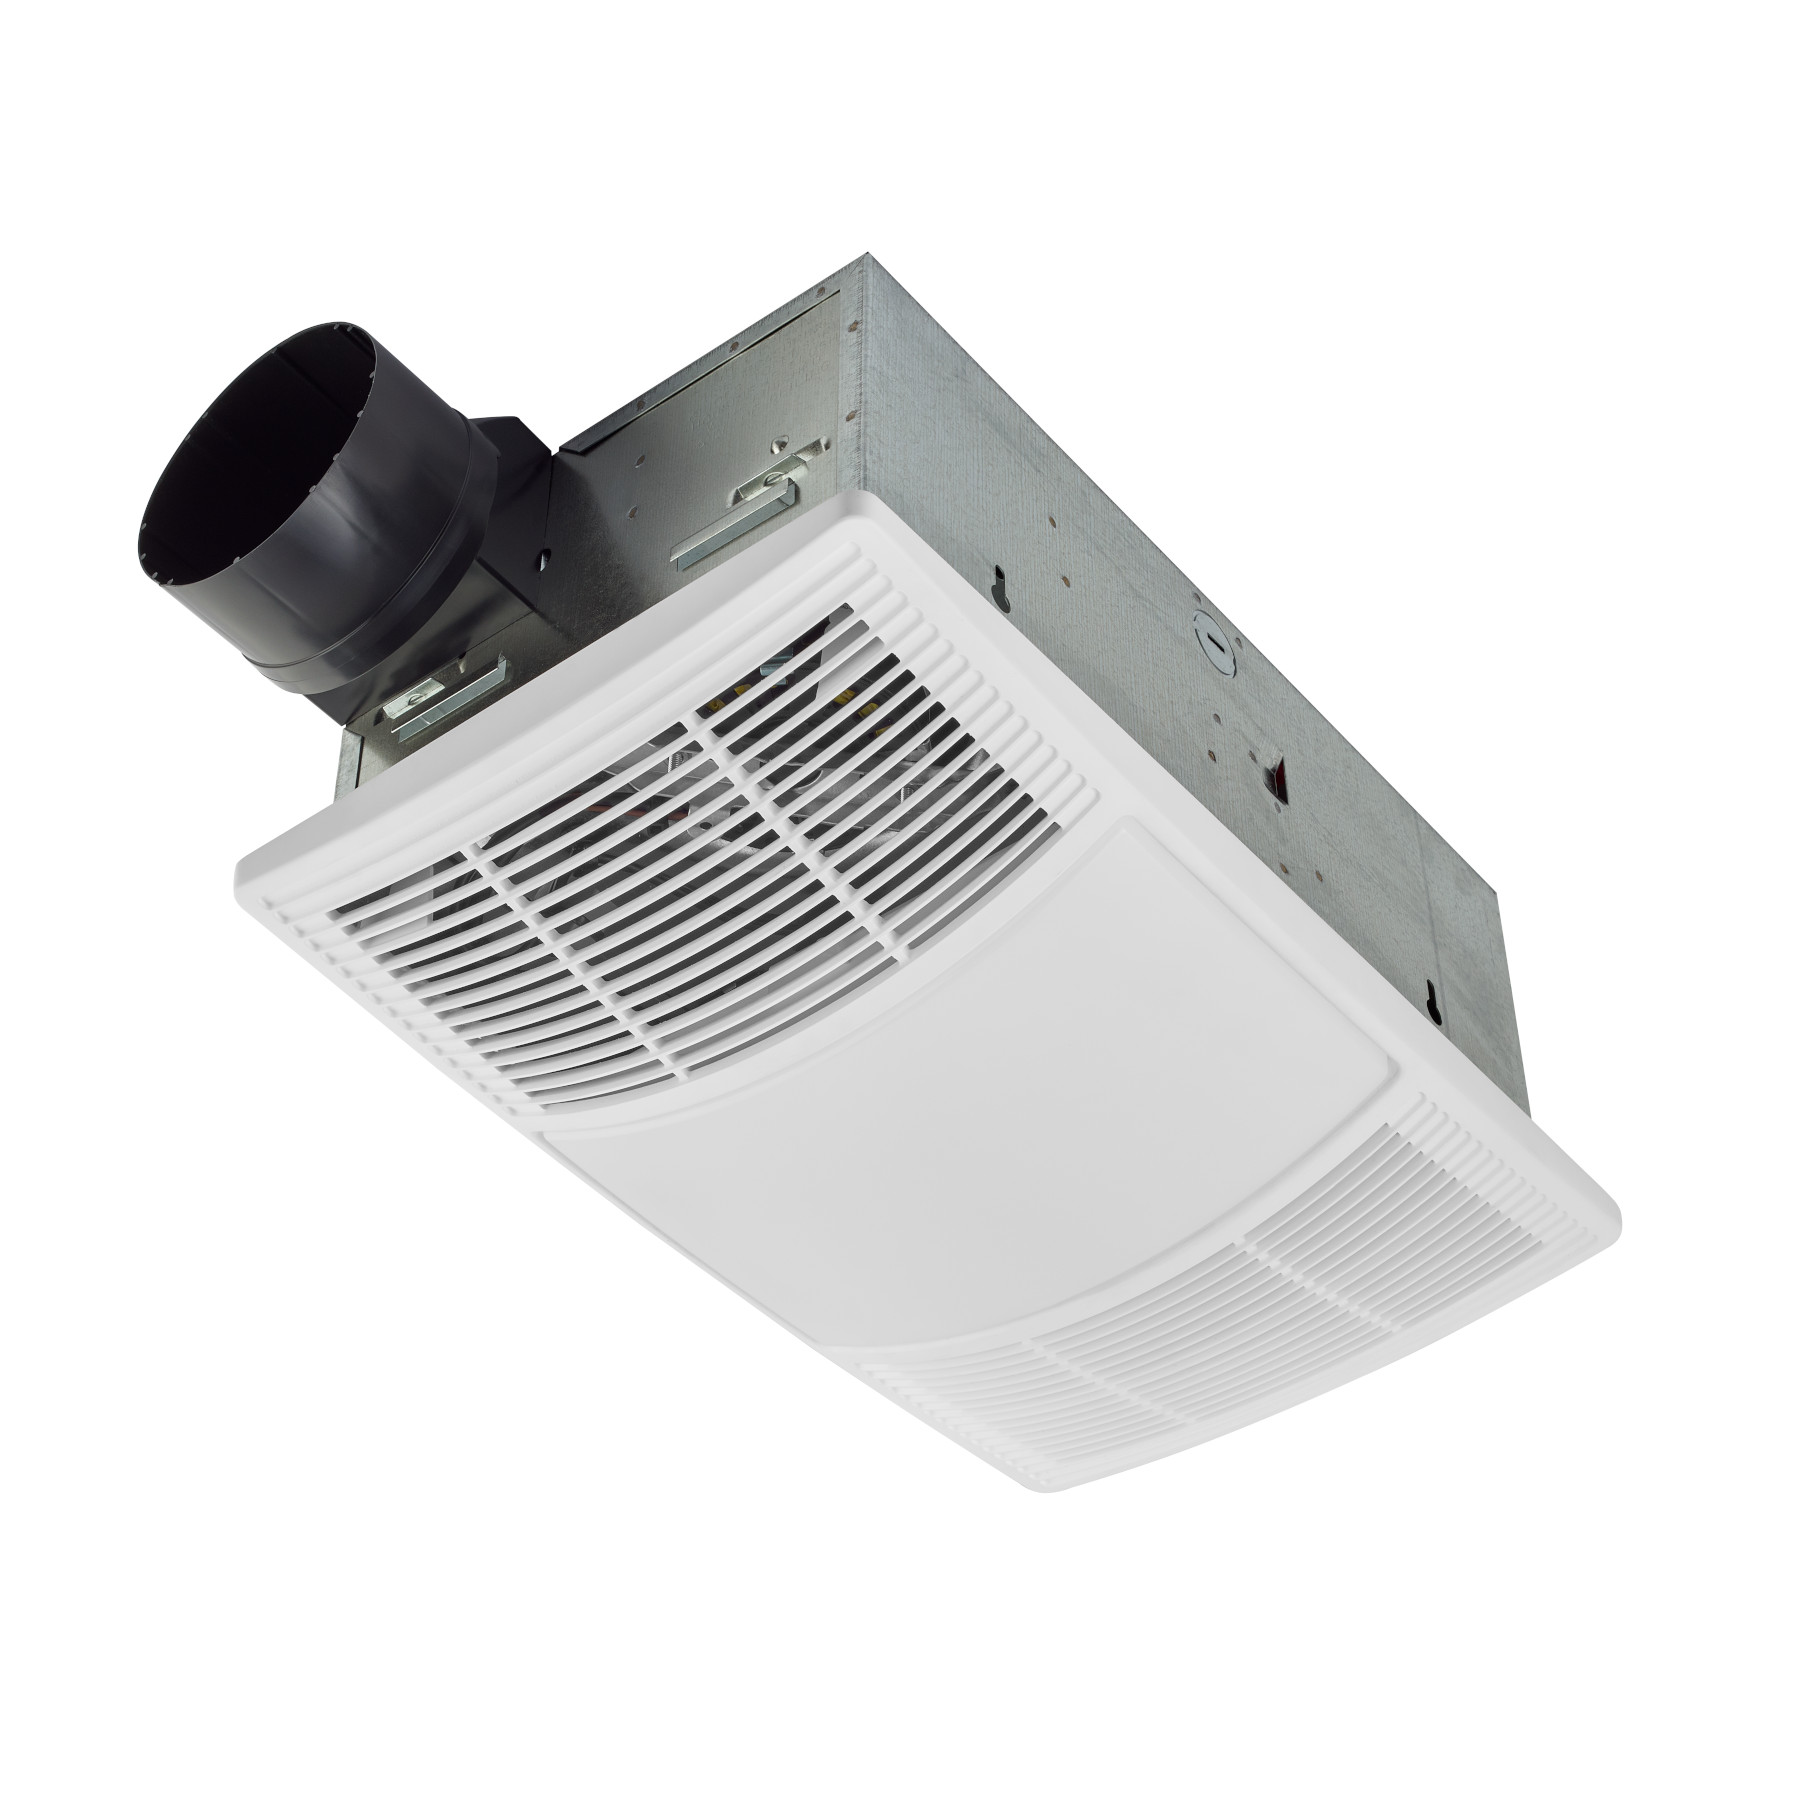 Bath And Exhaust Ventilation Fans With, Nutone Bathroom Fan With Light And Heater